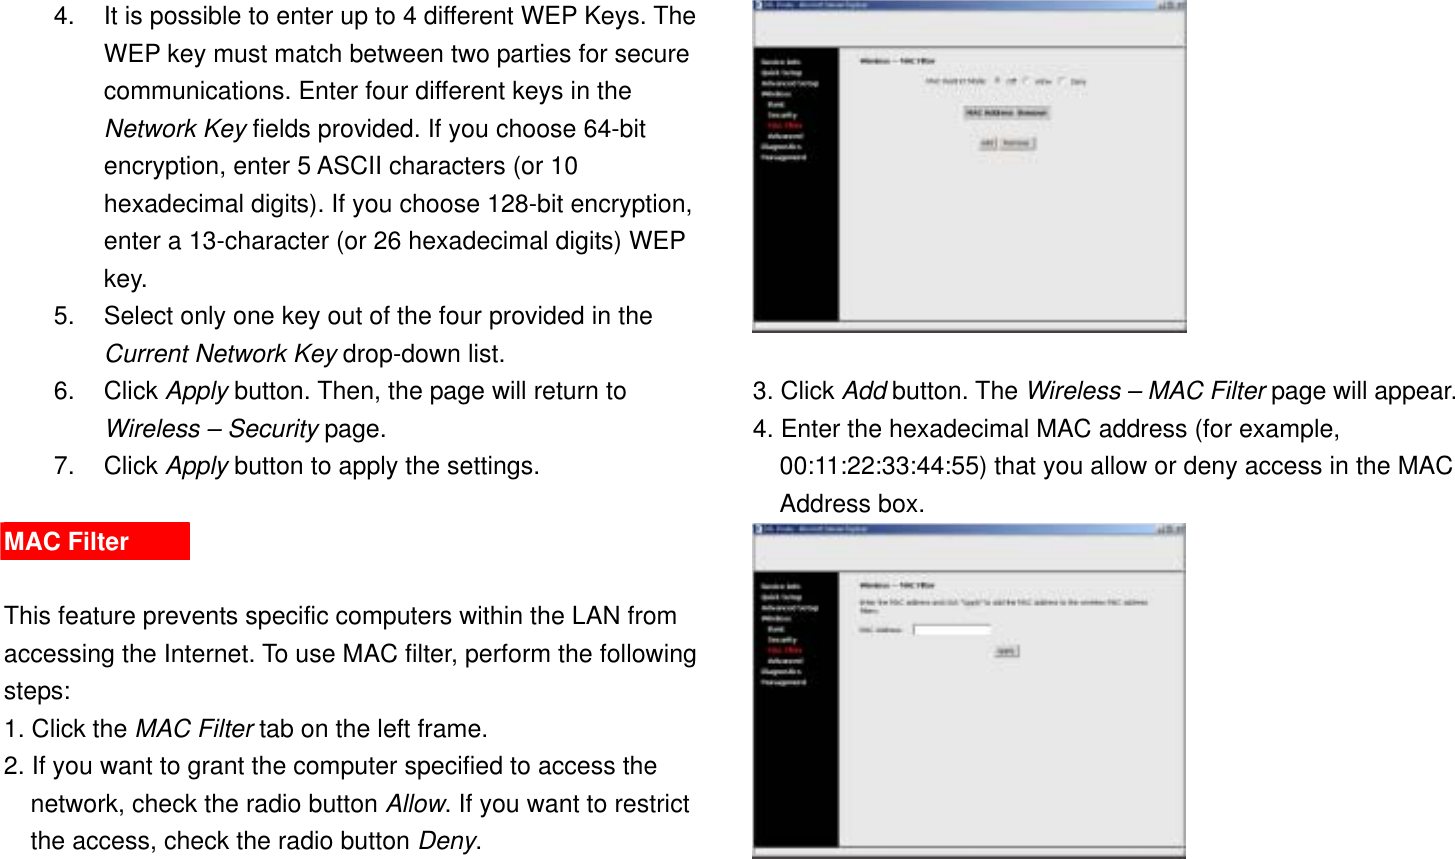 4.  It is possible to enter up to 4 different WEP Keys. The WEP key must match between two parties for secure communications. Enter four different keys in the Network Key fields provided. If you choose 64-bit encryption, enter 5 ASCII characters (or 10 hexadecimal digits). If you choose 128-bit encryption, enter a 13-character (or 26 hexadecimal digits) WEP key. 5.  Select only one key out of the four provided in the Current Network Key drop-down list. 6. Click Apply button. Then, the page will return to Wireless – Security page. 7. Click Apply button to apply the settings.  MAC Filter  This feature prevents specific computers within the LAN from accessing the Internet. To use MAC filter, perform the following steps: 1. Click the MAC Filter tab on the left frame. 2. If you want to grant the computer specified to access the network, check the radio button Allow. If you want to restrict the access, check the radio button Deny.   3. Click Add button. The Wireless – MAC Filter page will appear. 4. Enter the hexadecimal MAC address (for example, 00:11:22:33:44:55) that you allow or deny access in the MAC Address box.  